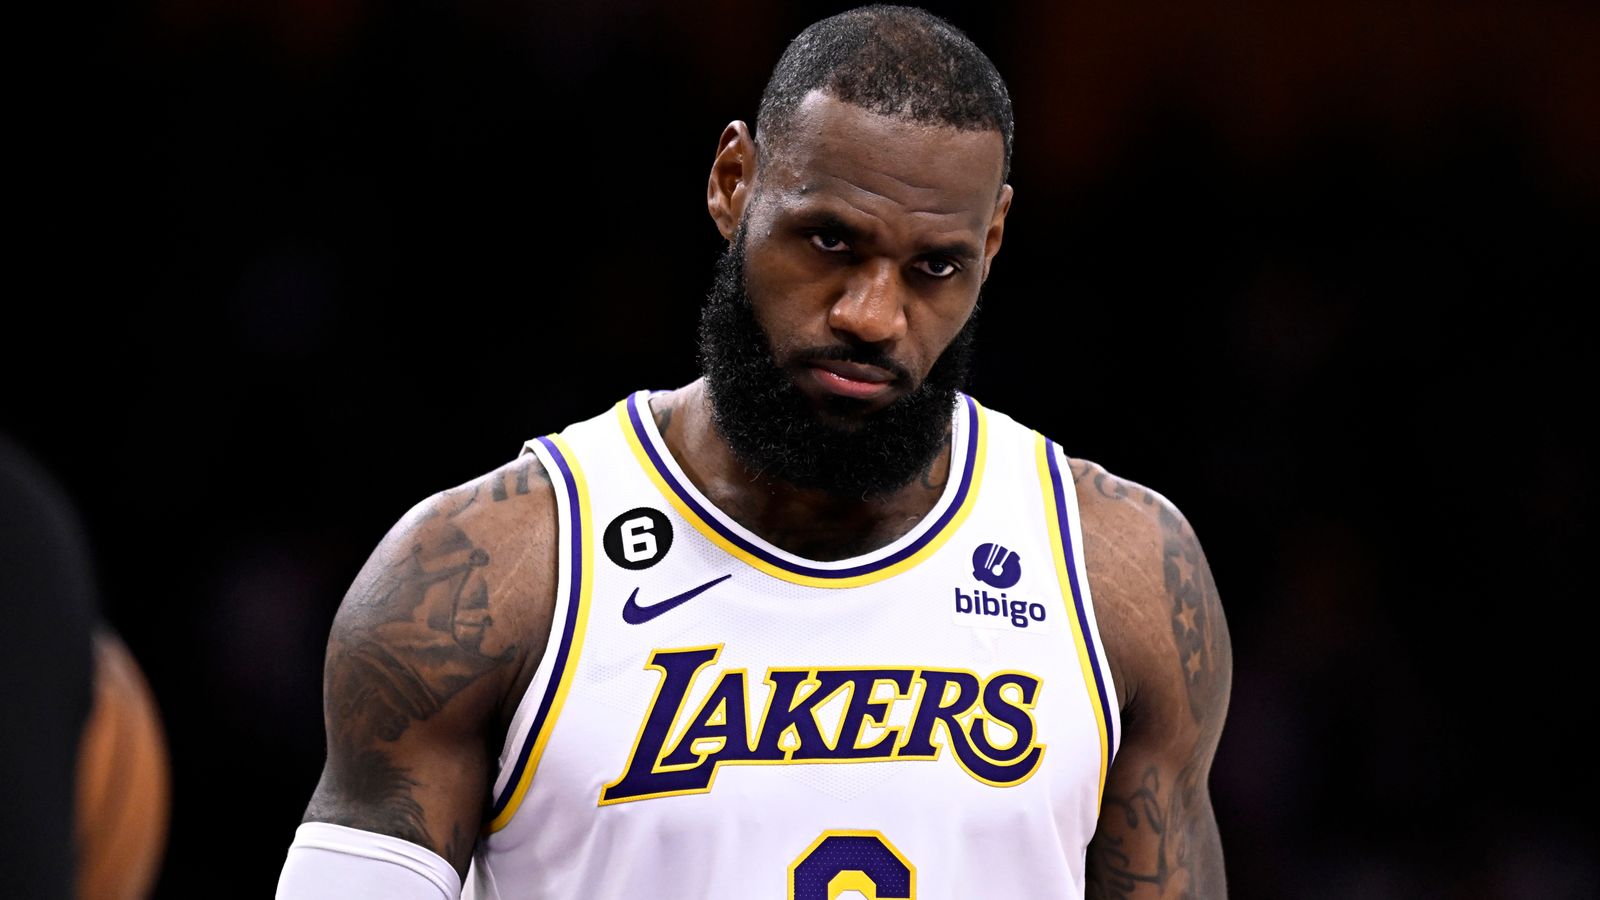 la-lakers-failure-to-address-their-shooting-issues-could-lead-to-another-wasted-season-for-lebron-james